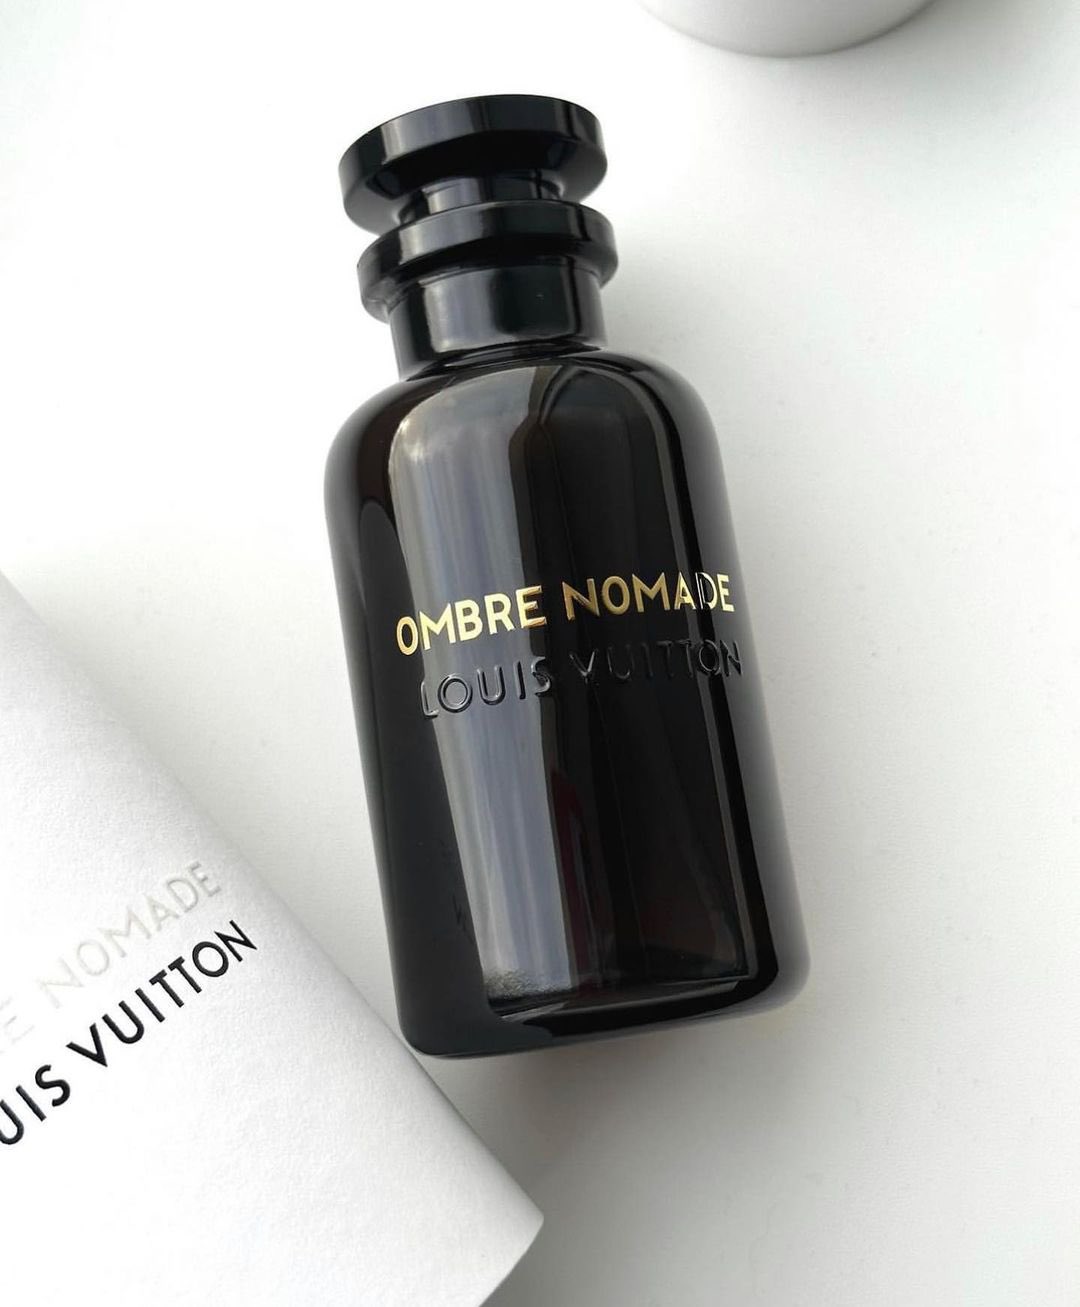 Omotayo, Your Perfume Plug✨ on X: Louis Vuitton Ombre Nomade - incensey,  leathery, oud and rose. Performance is nuclear. not beast mode, nuclear. 🔥  This is a 10/10. N550,000  / X